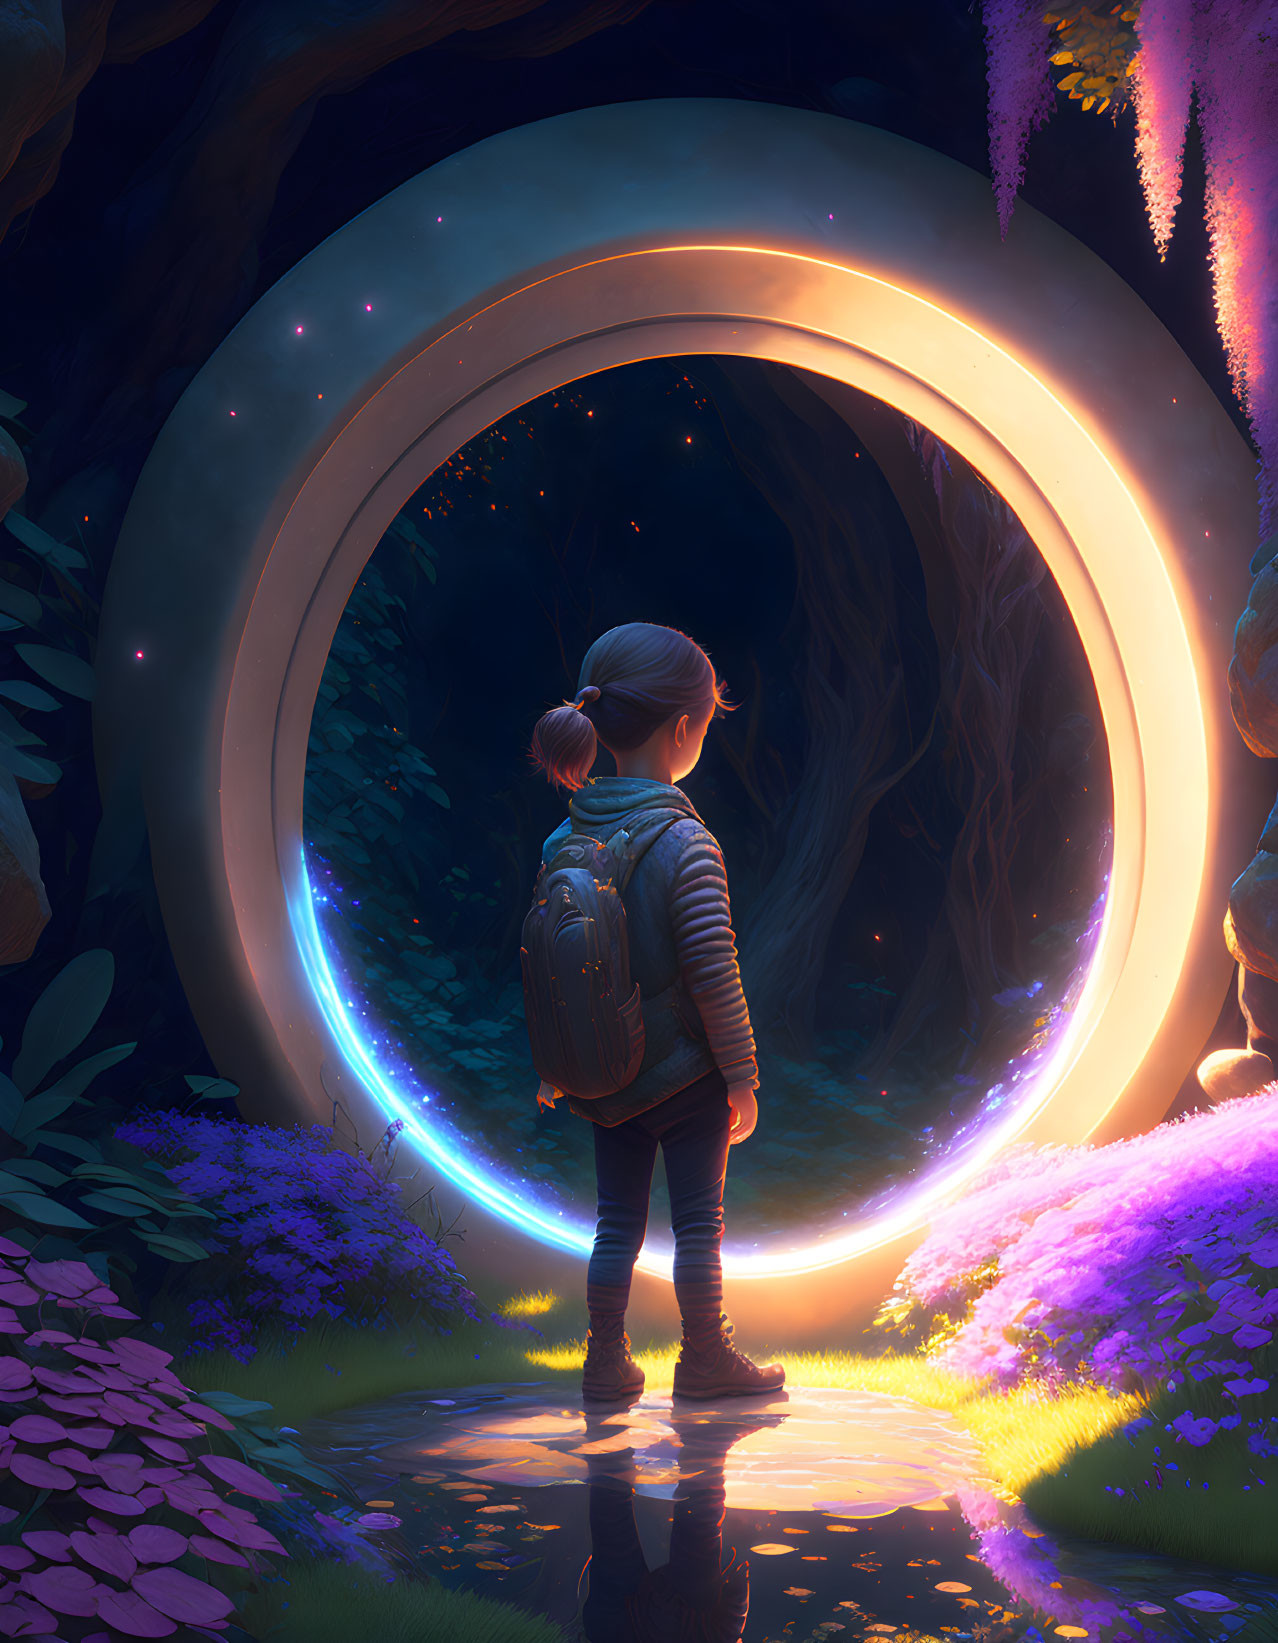 Child with backpack in front of large circular portal in mystical forest at twilight